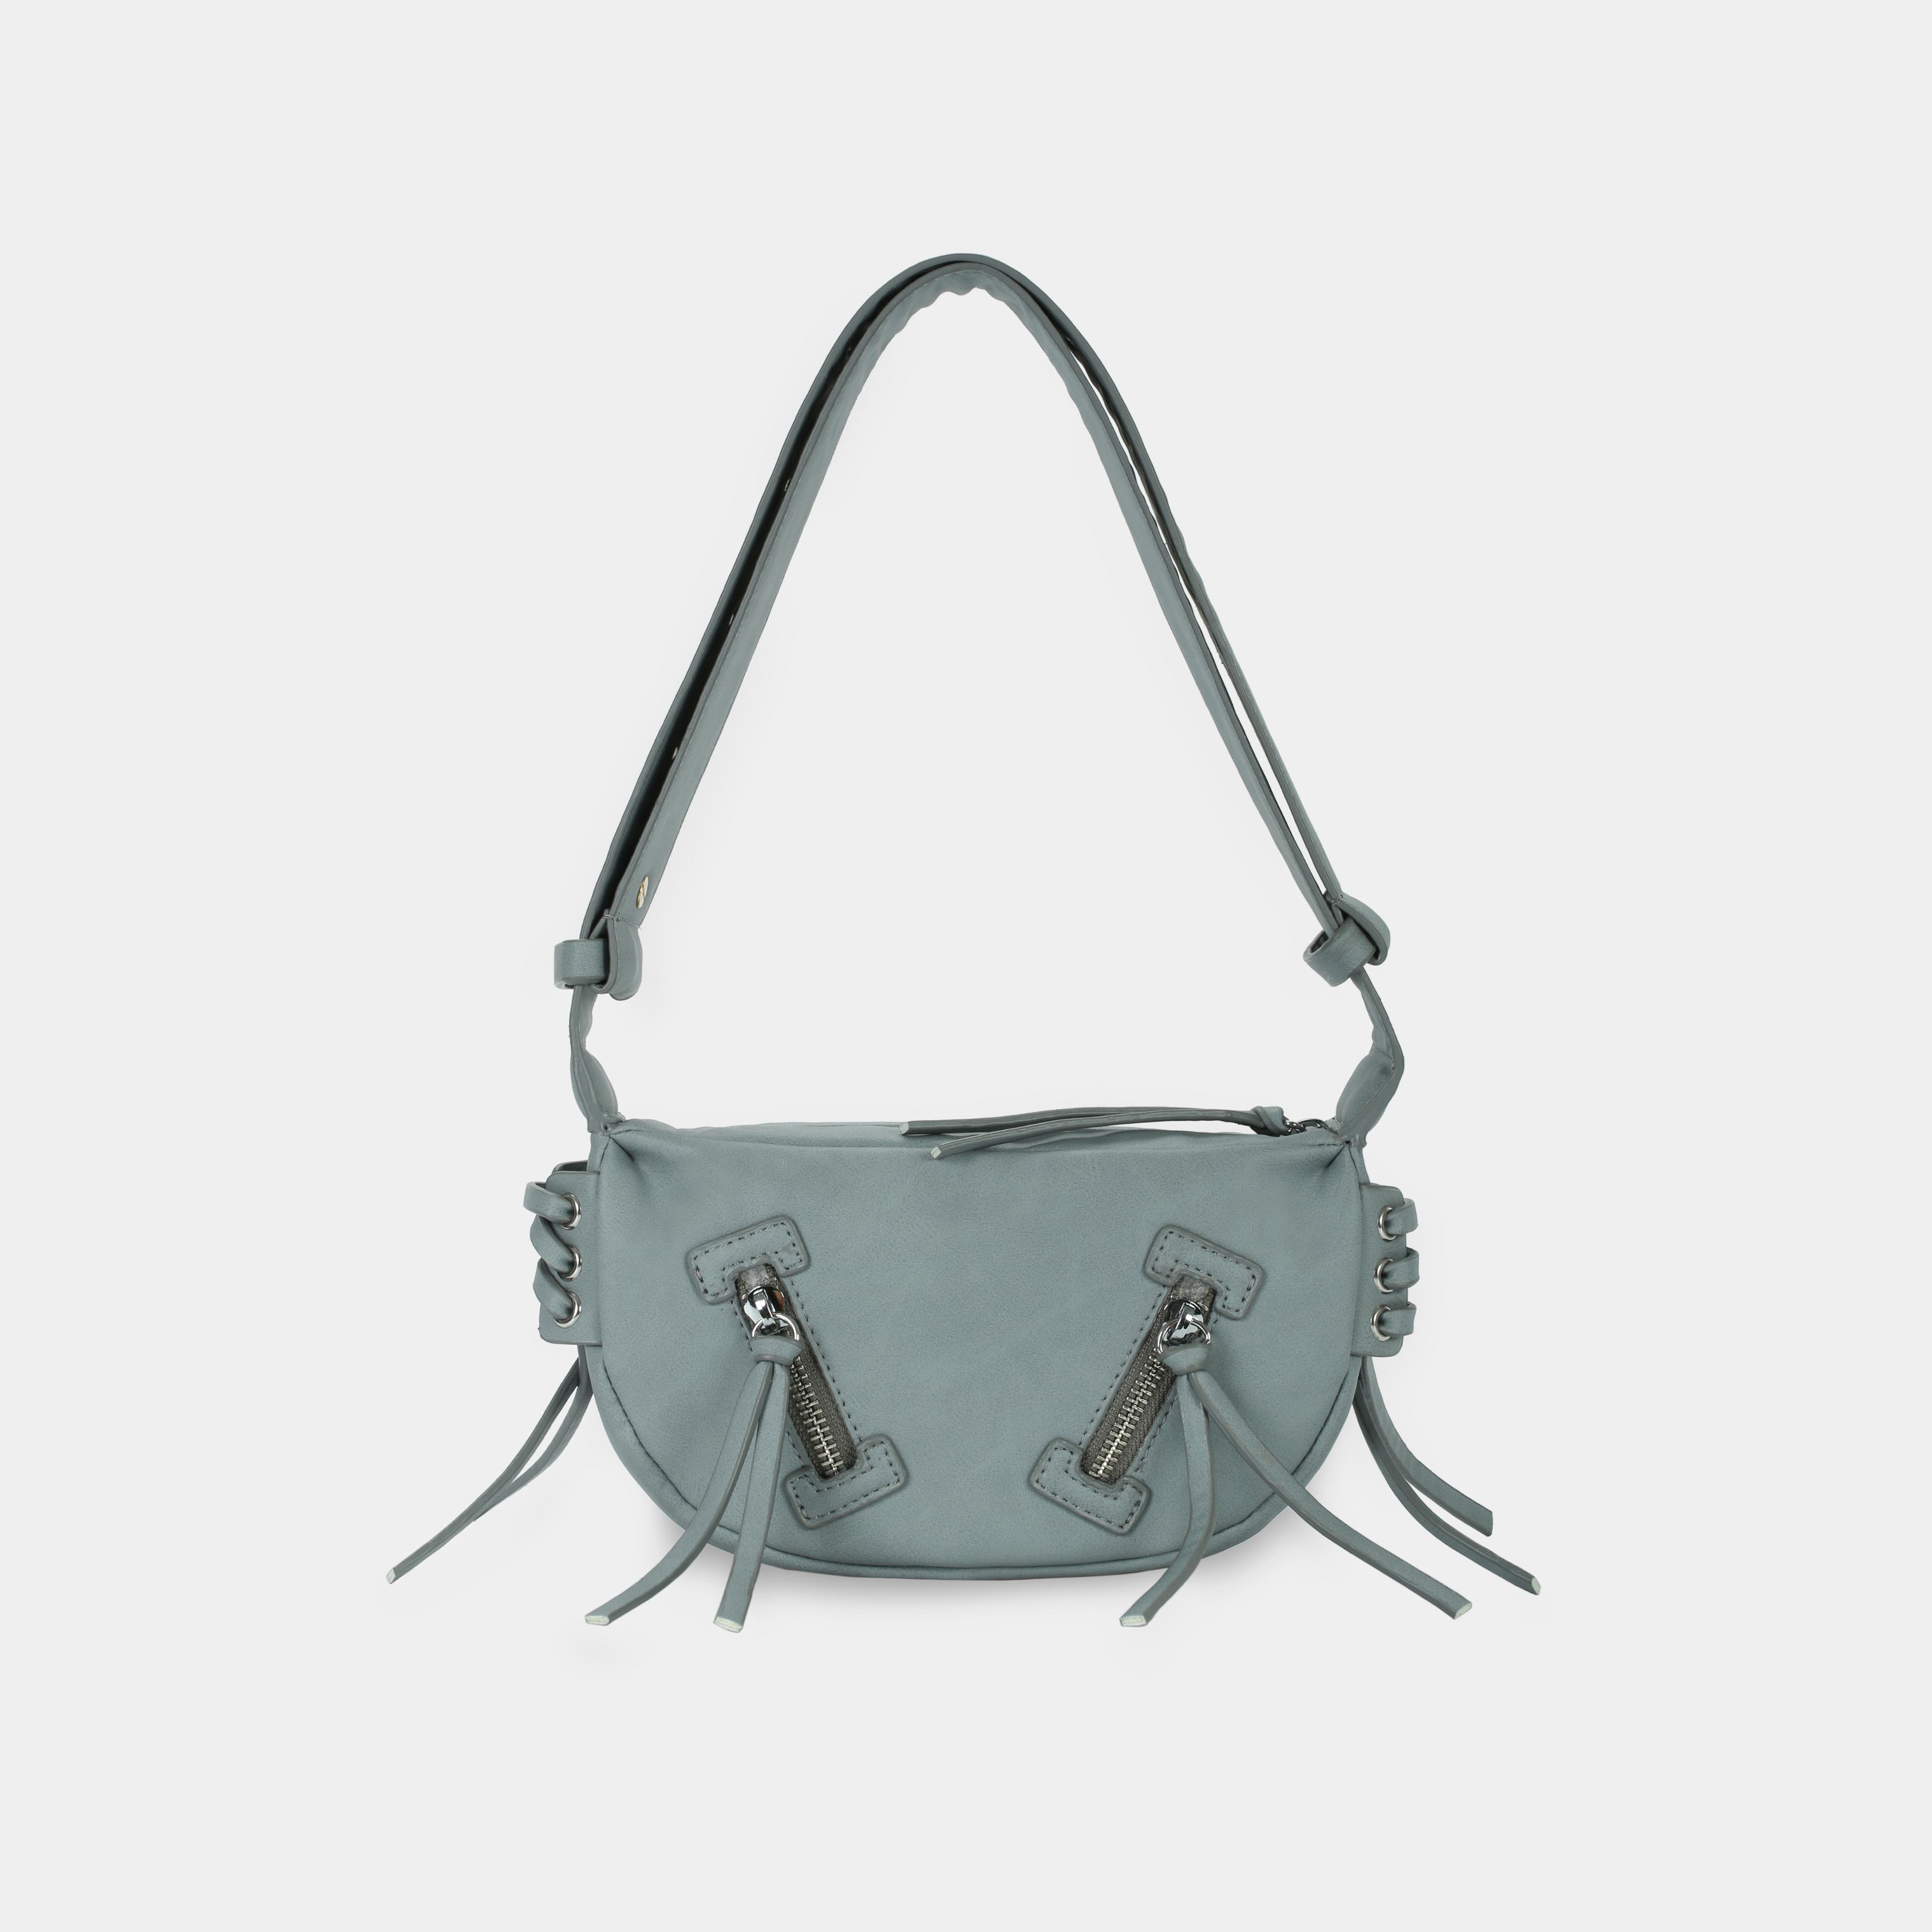 LACE bag small size (S) blue cement